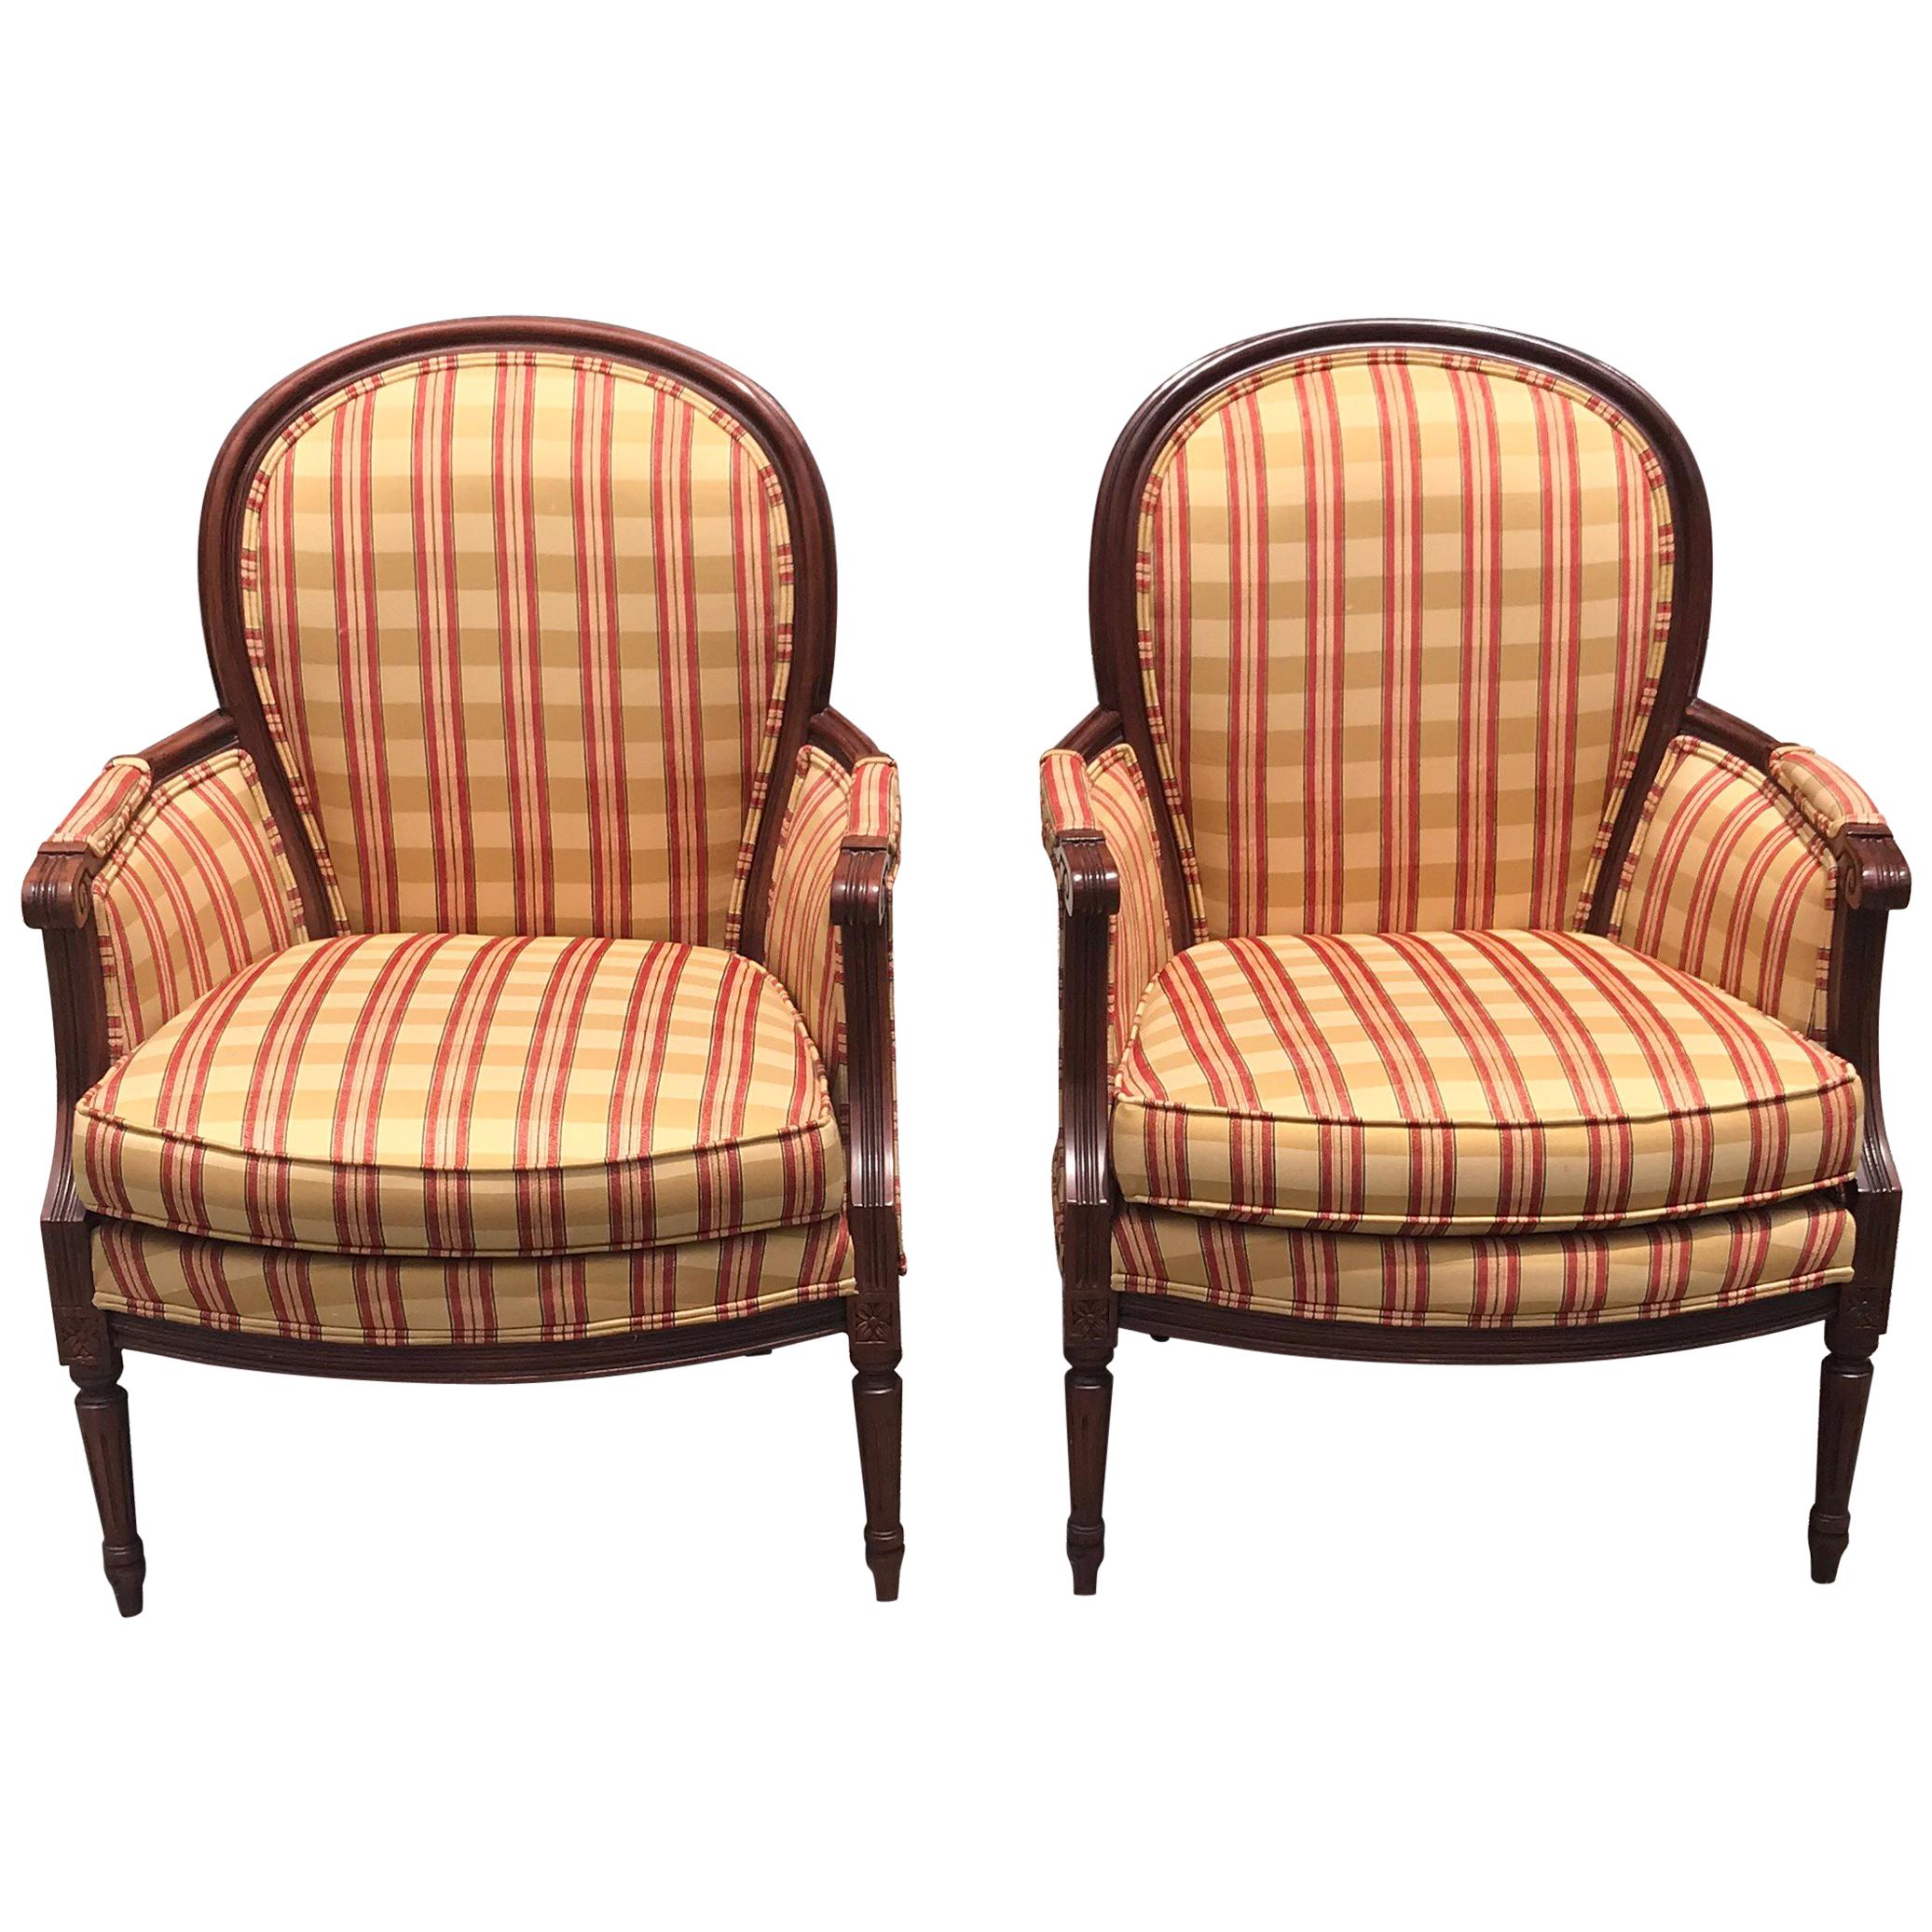 Pair of French Louis XVI Carved Mahogany Accent Chairs or Bergère Chairs, 1920s